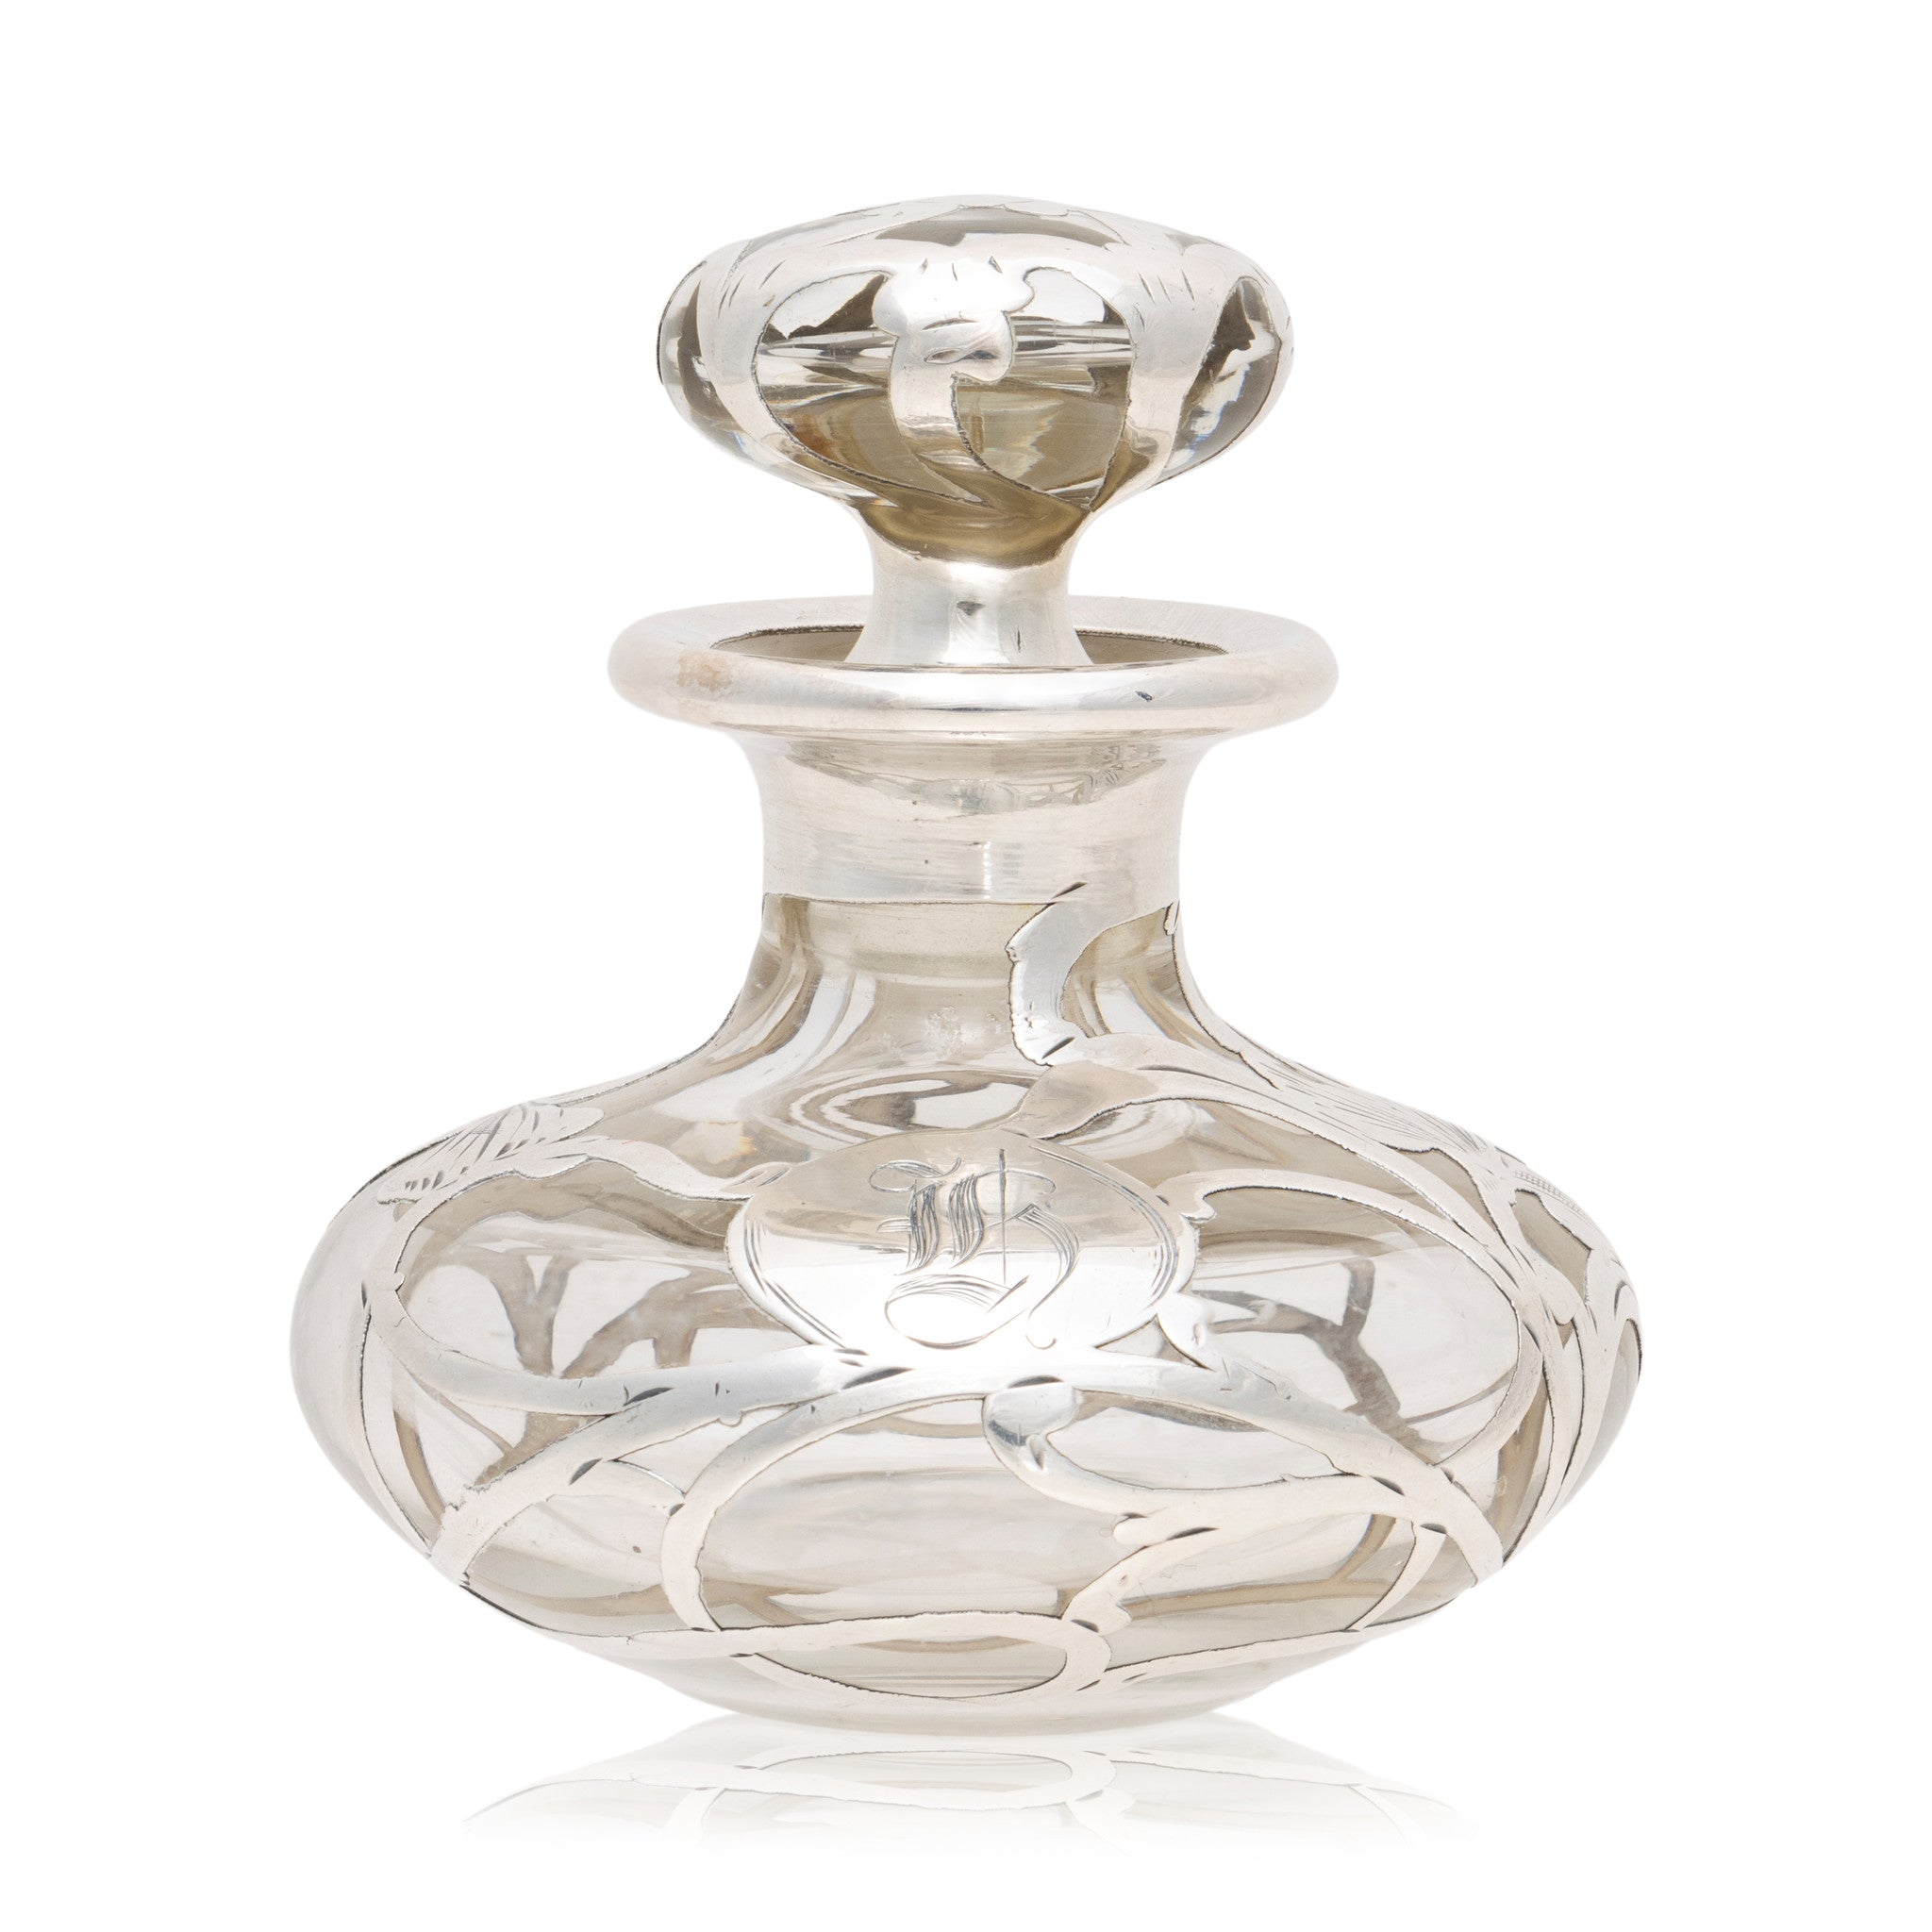 Alvin Silver Overlaid Perfume Bottle, Jewelry, Display Piece, Other